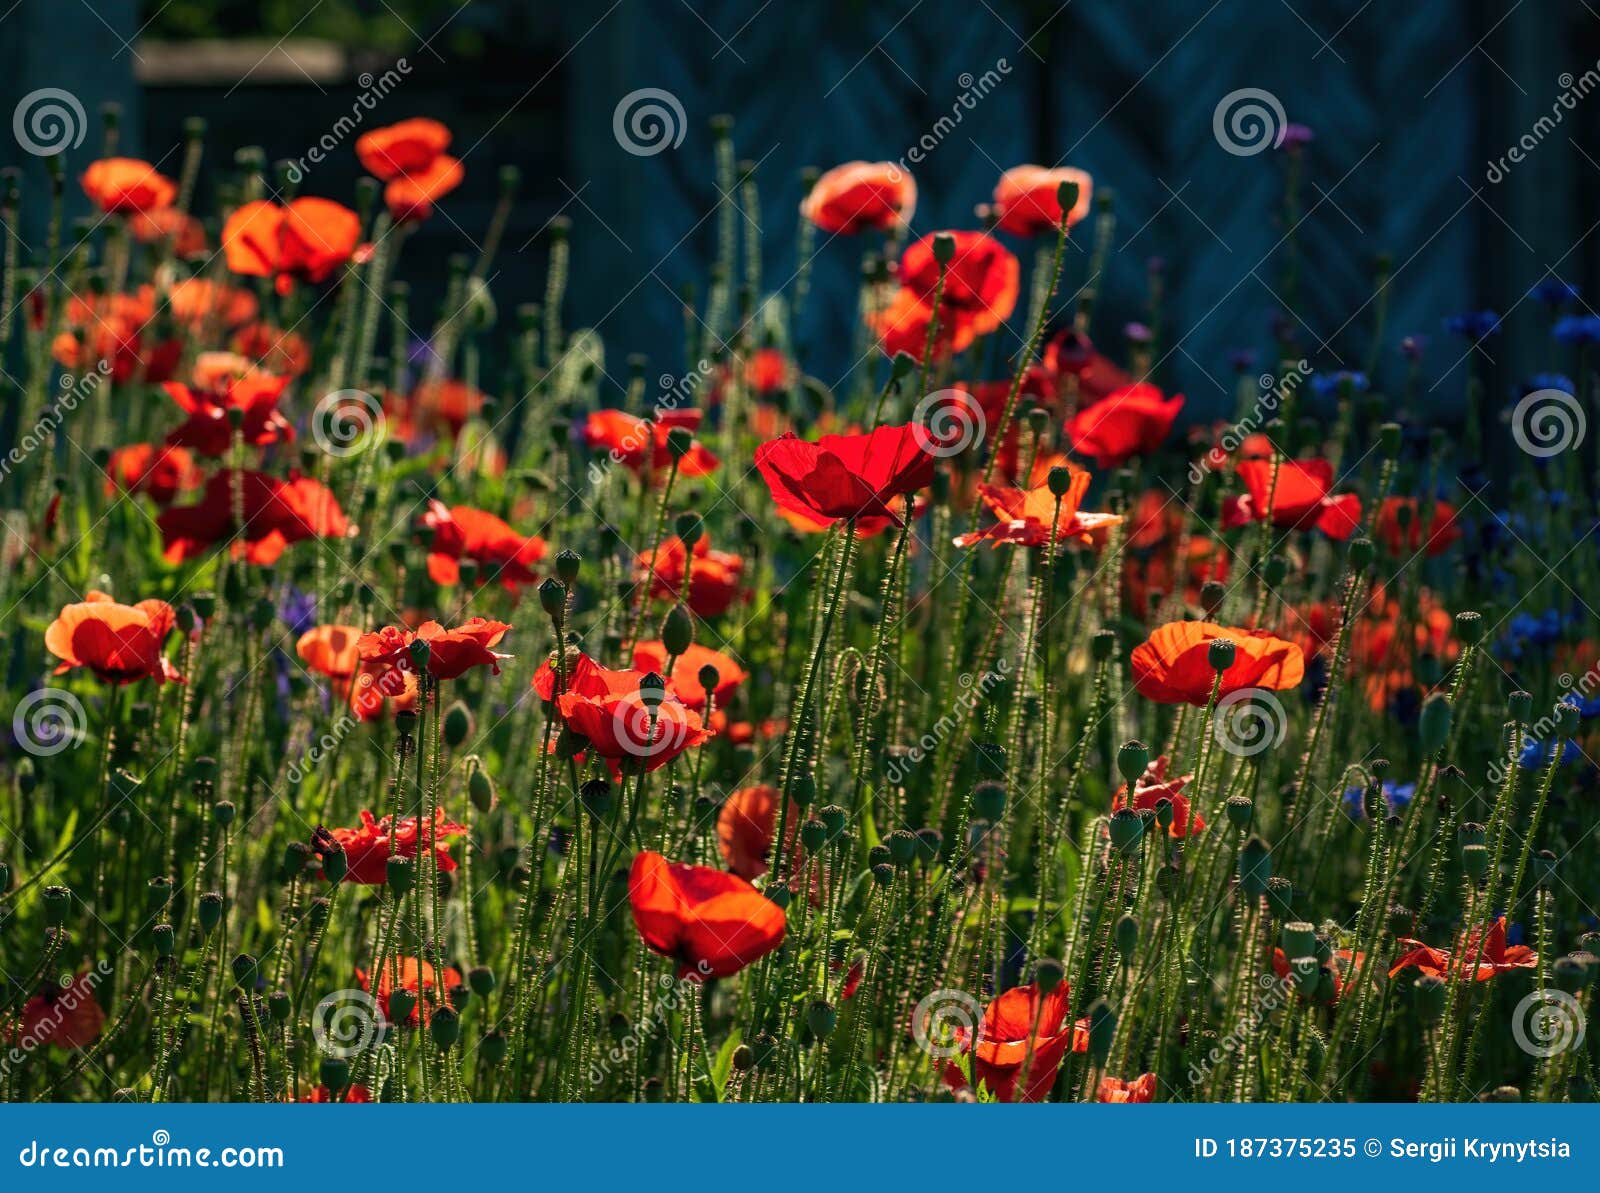 red poppies illuminated by morning sunlight on the meadow at summertime